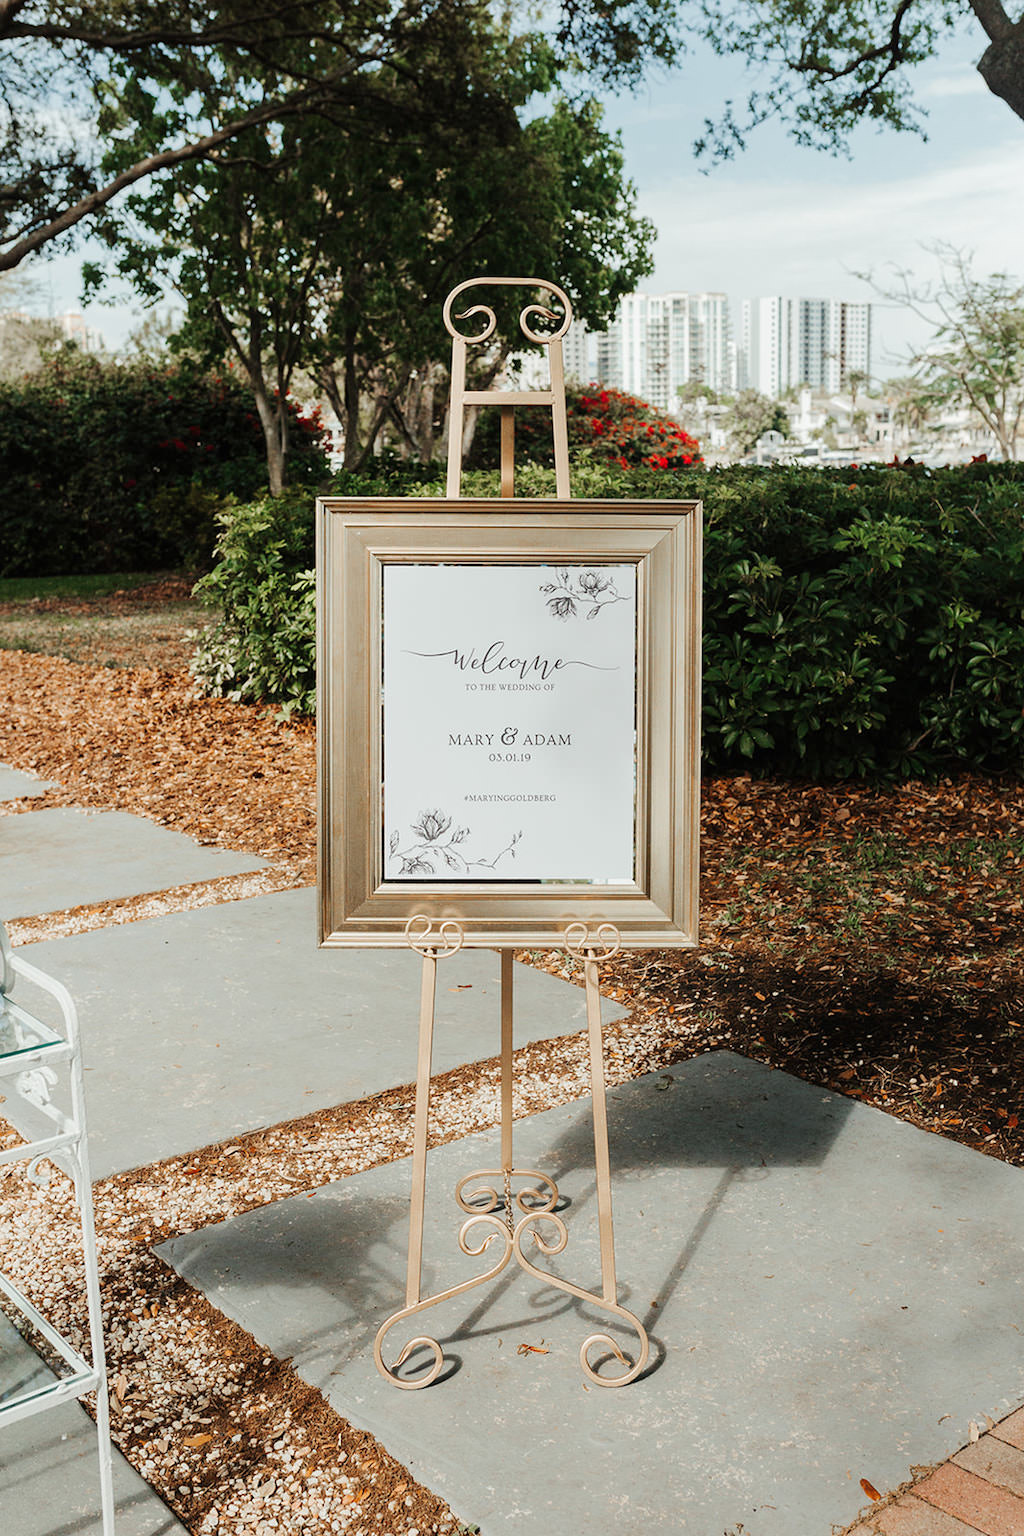 Tampa Bay Wedding Ceremony Decor, Gold Frame with Garden Chic Inspired Welcome Sign for Outdoor Wedding Ceremony at Davis Islands Garden Club